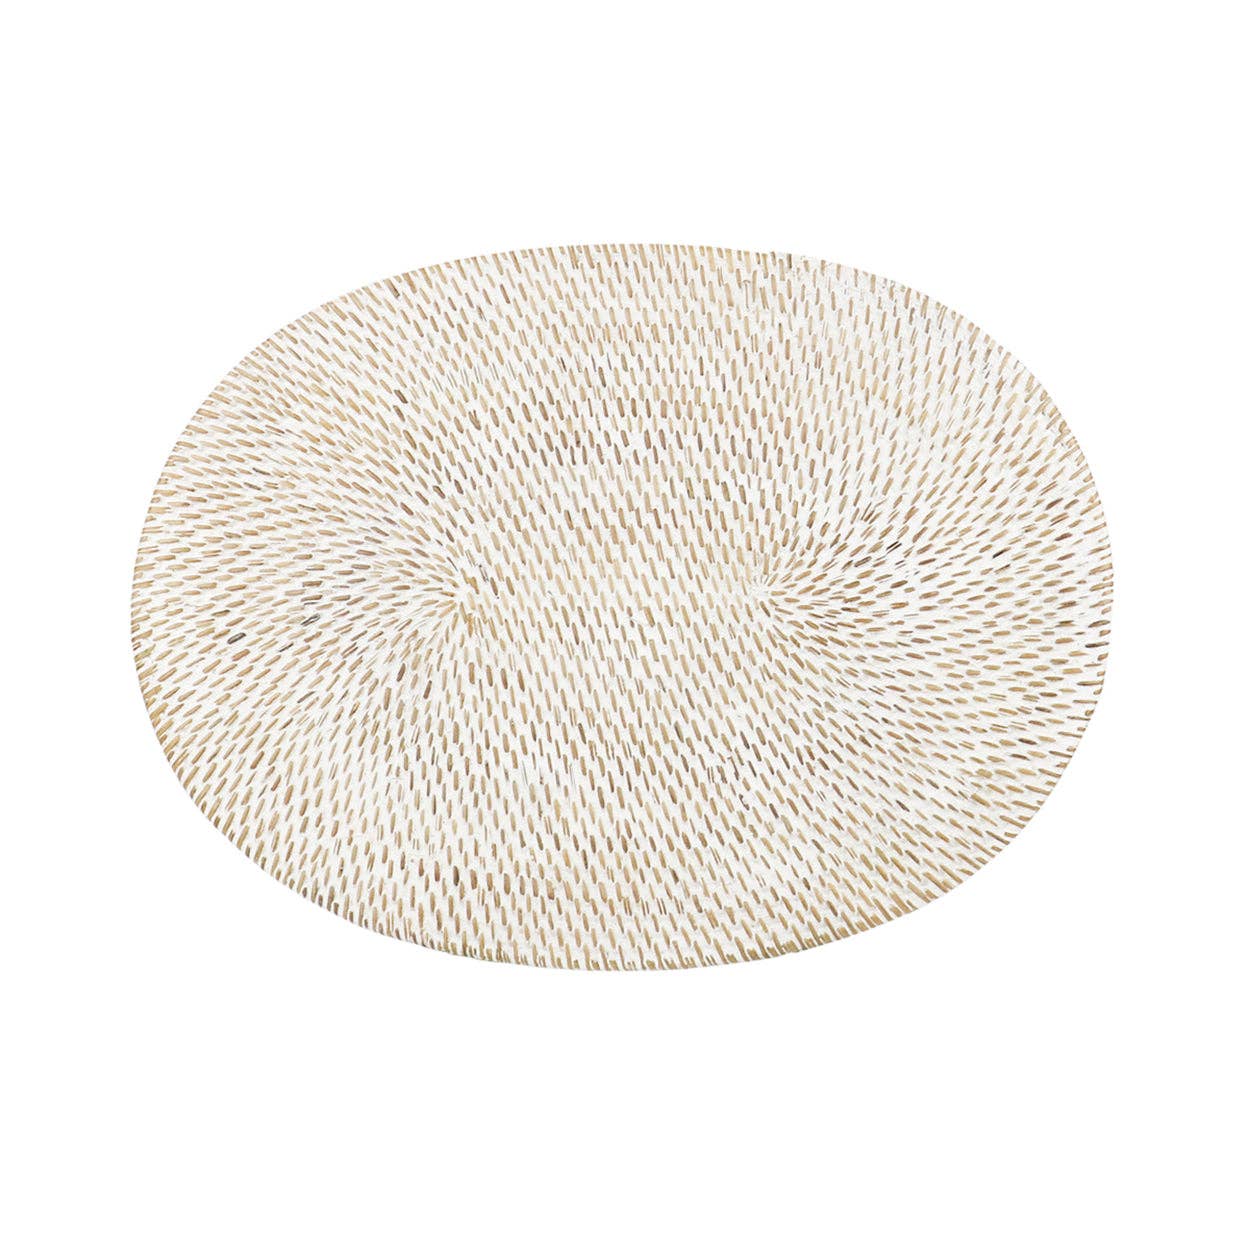 Bali Oval Placemat